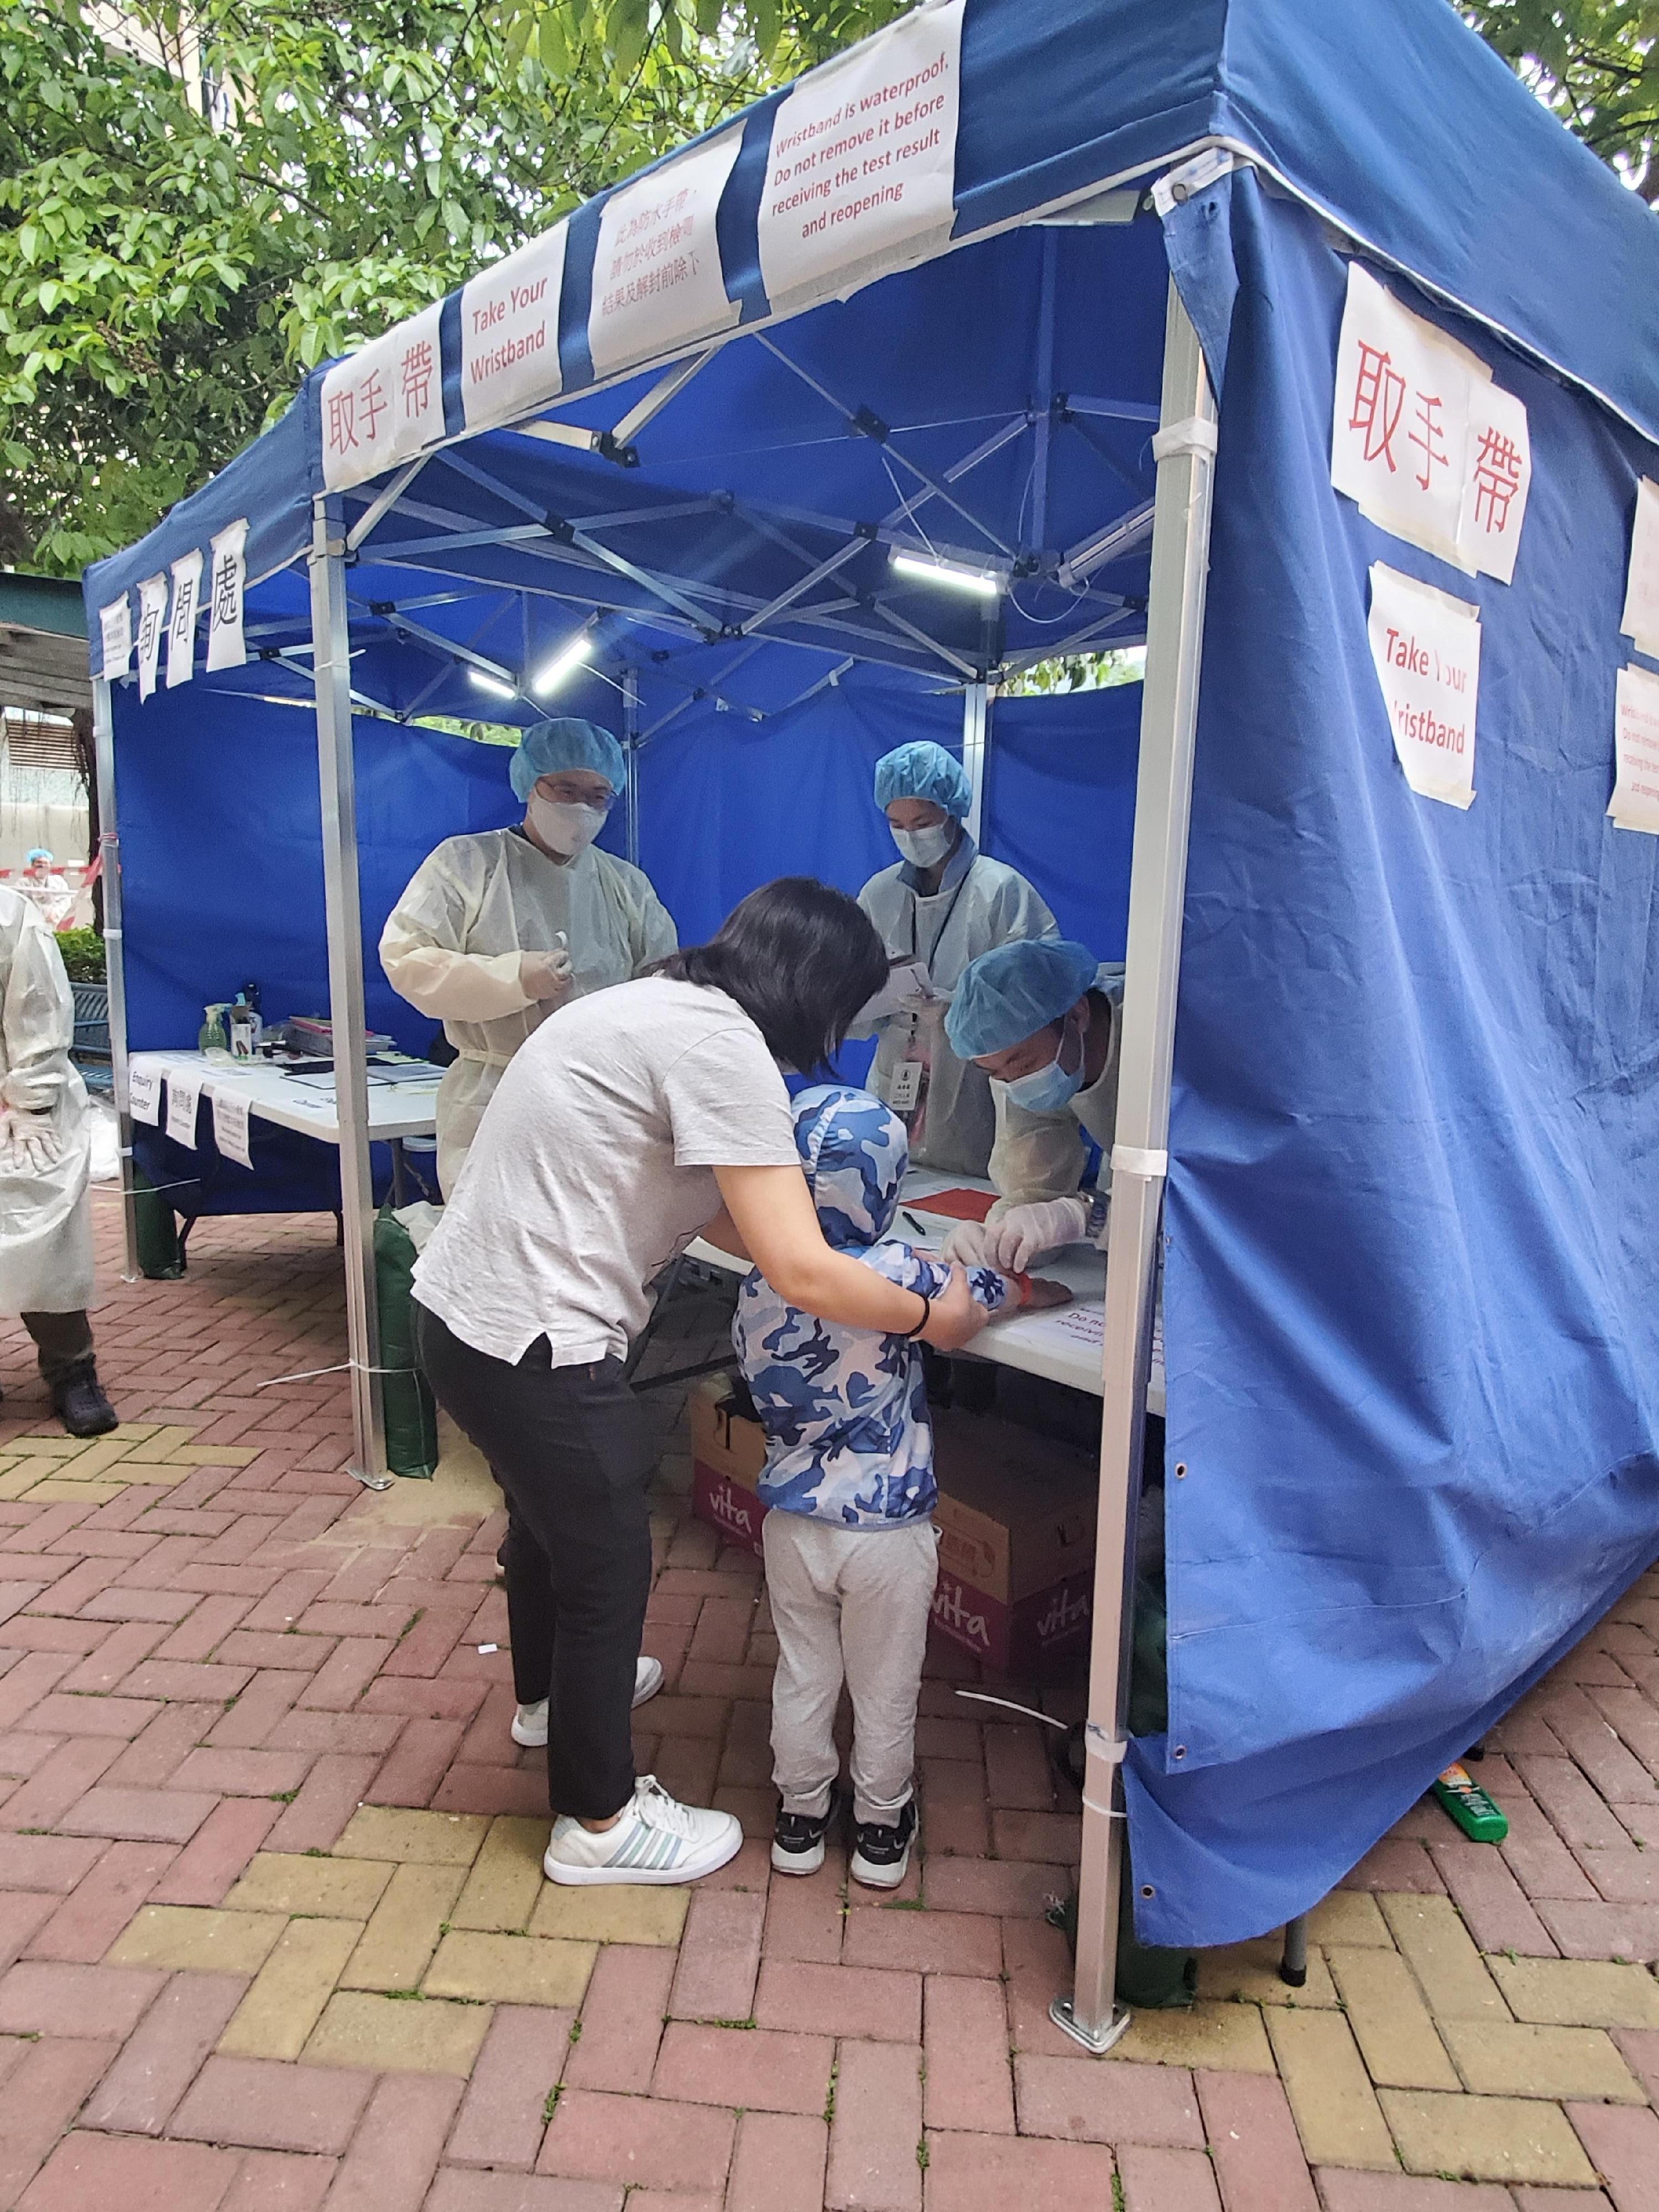 The Government yesterday (April 17) enforced "restriction-testing declaration" and compulsory testing notice in respect of specified "restricted area" in Ching Yun House, Ching Ho Estate, Sheung Shui. Photo shows staff members of the Agriculture, Fisheries and Conservation Department putting a wristband on a resident who has undergone compulsory testing.